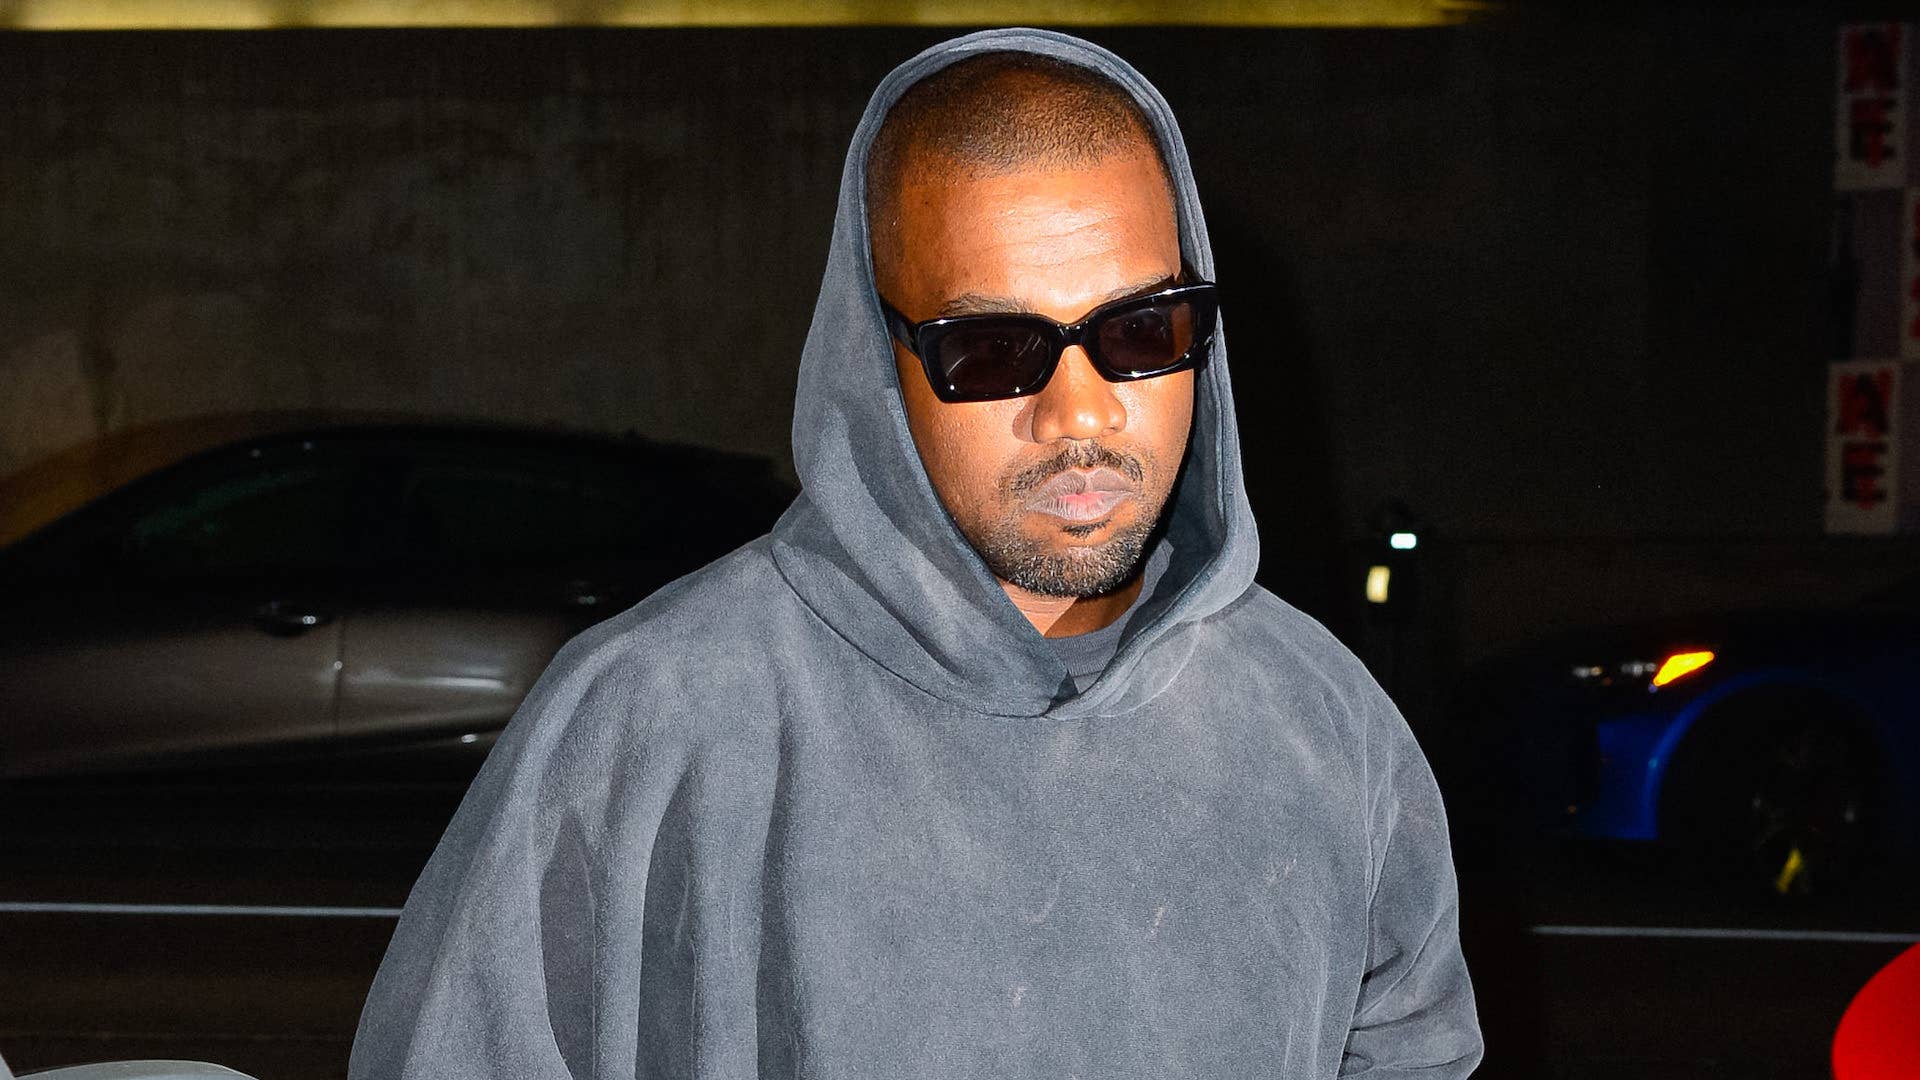 Kanye West is seen on January 10, 2022 in Los Angeles.